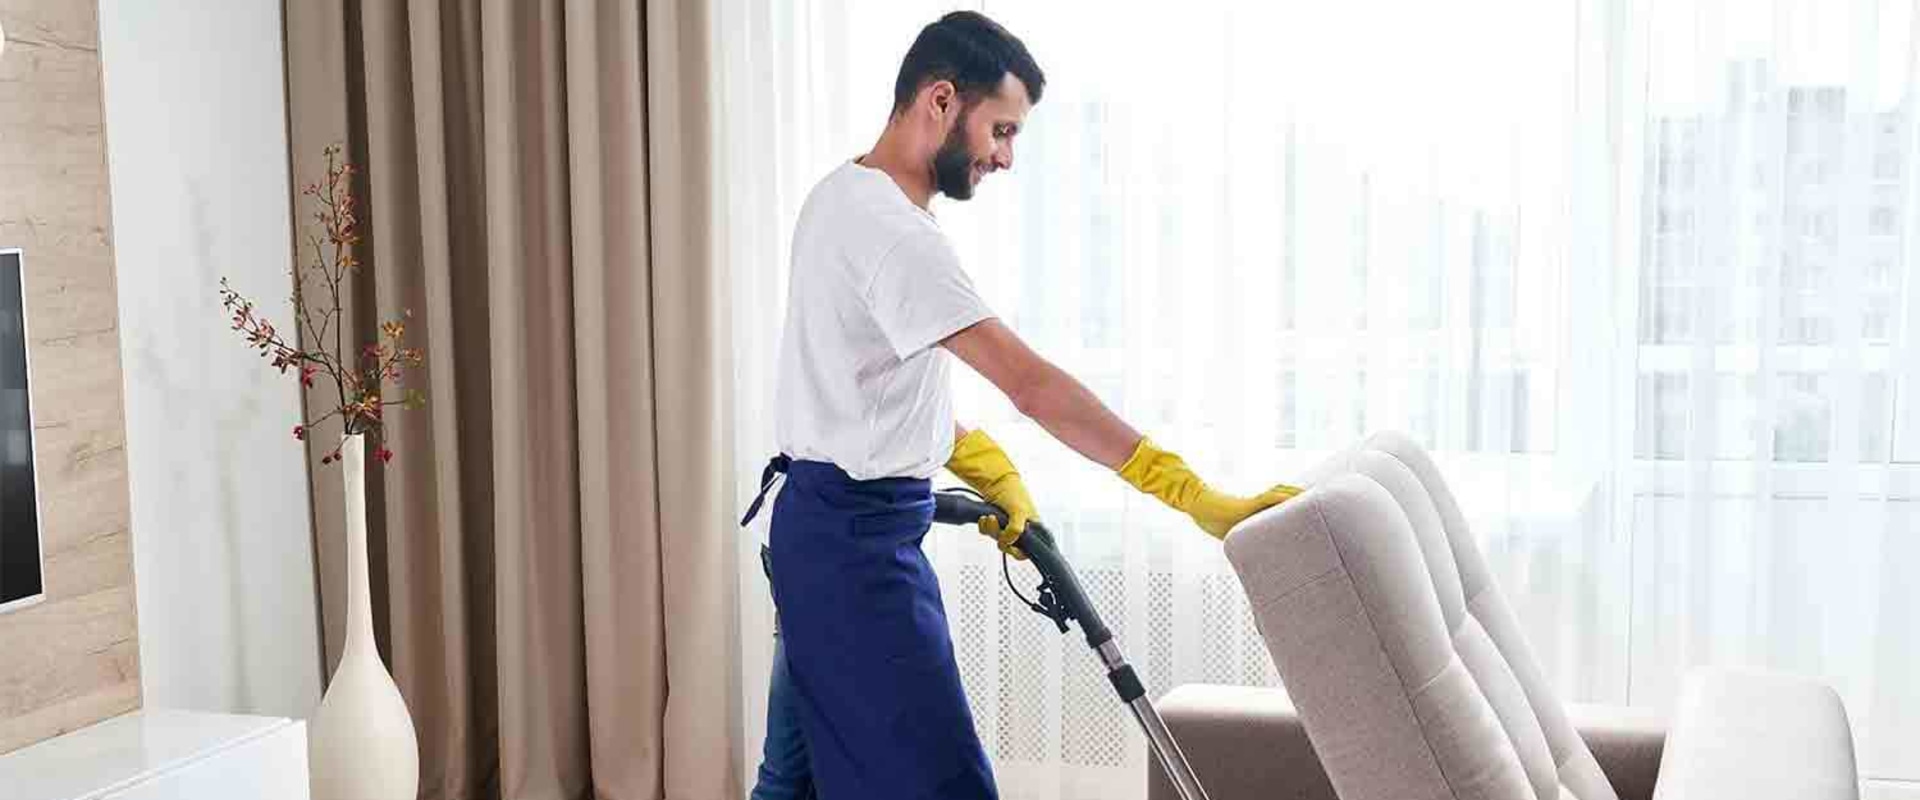 Do I Need to Provide Access to All Areas of My Home for Cleaning Services?